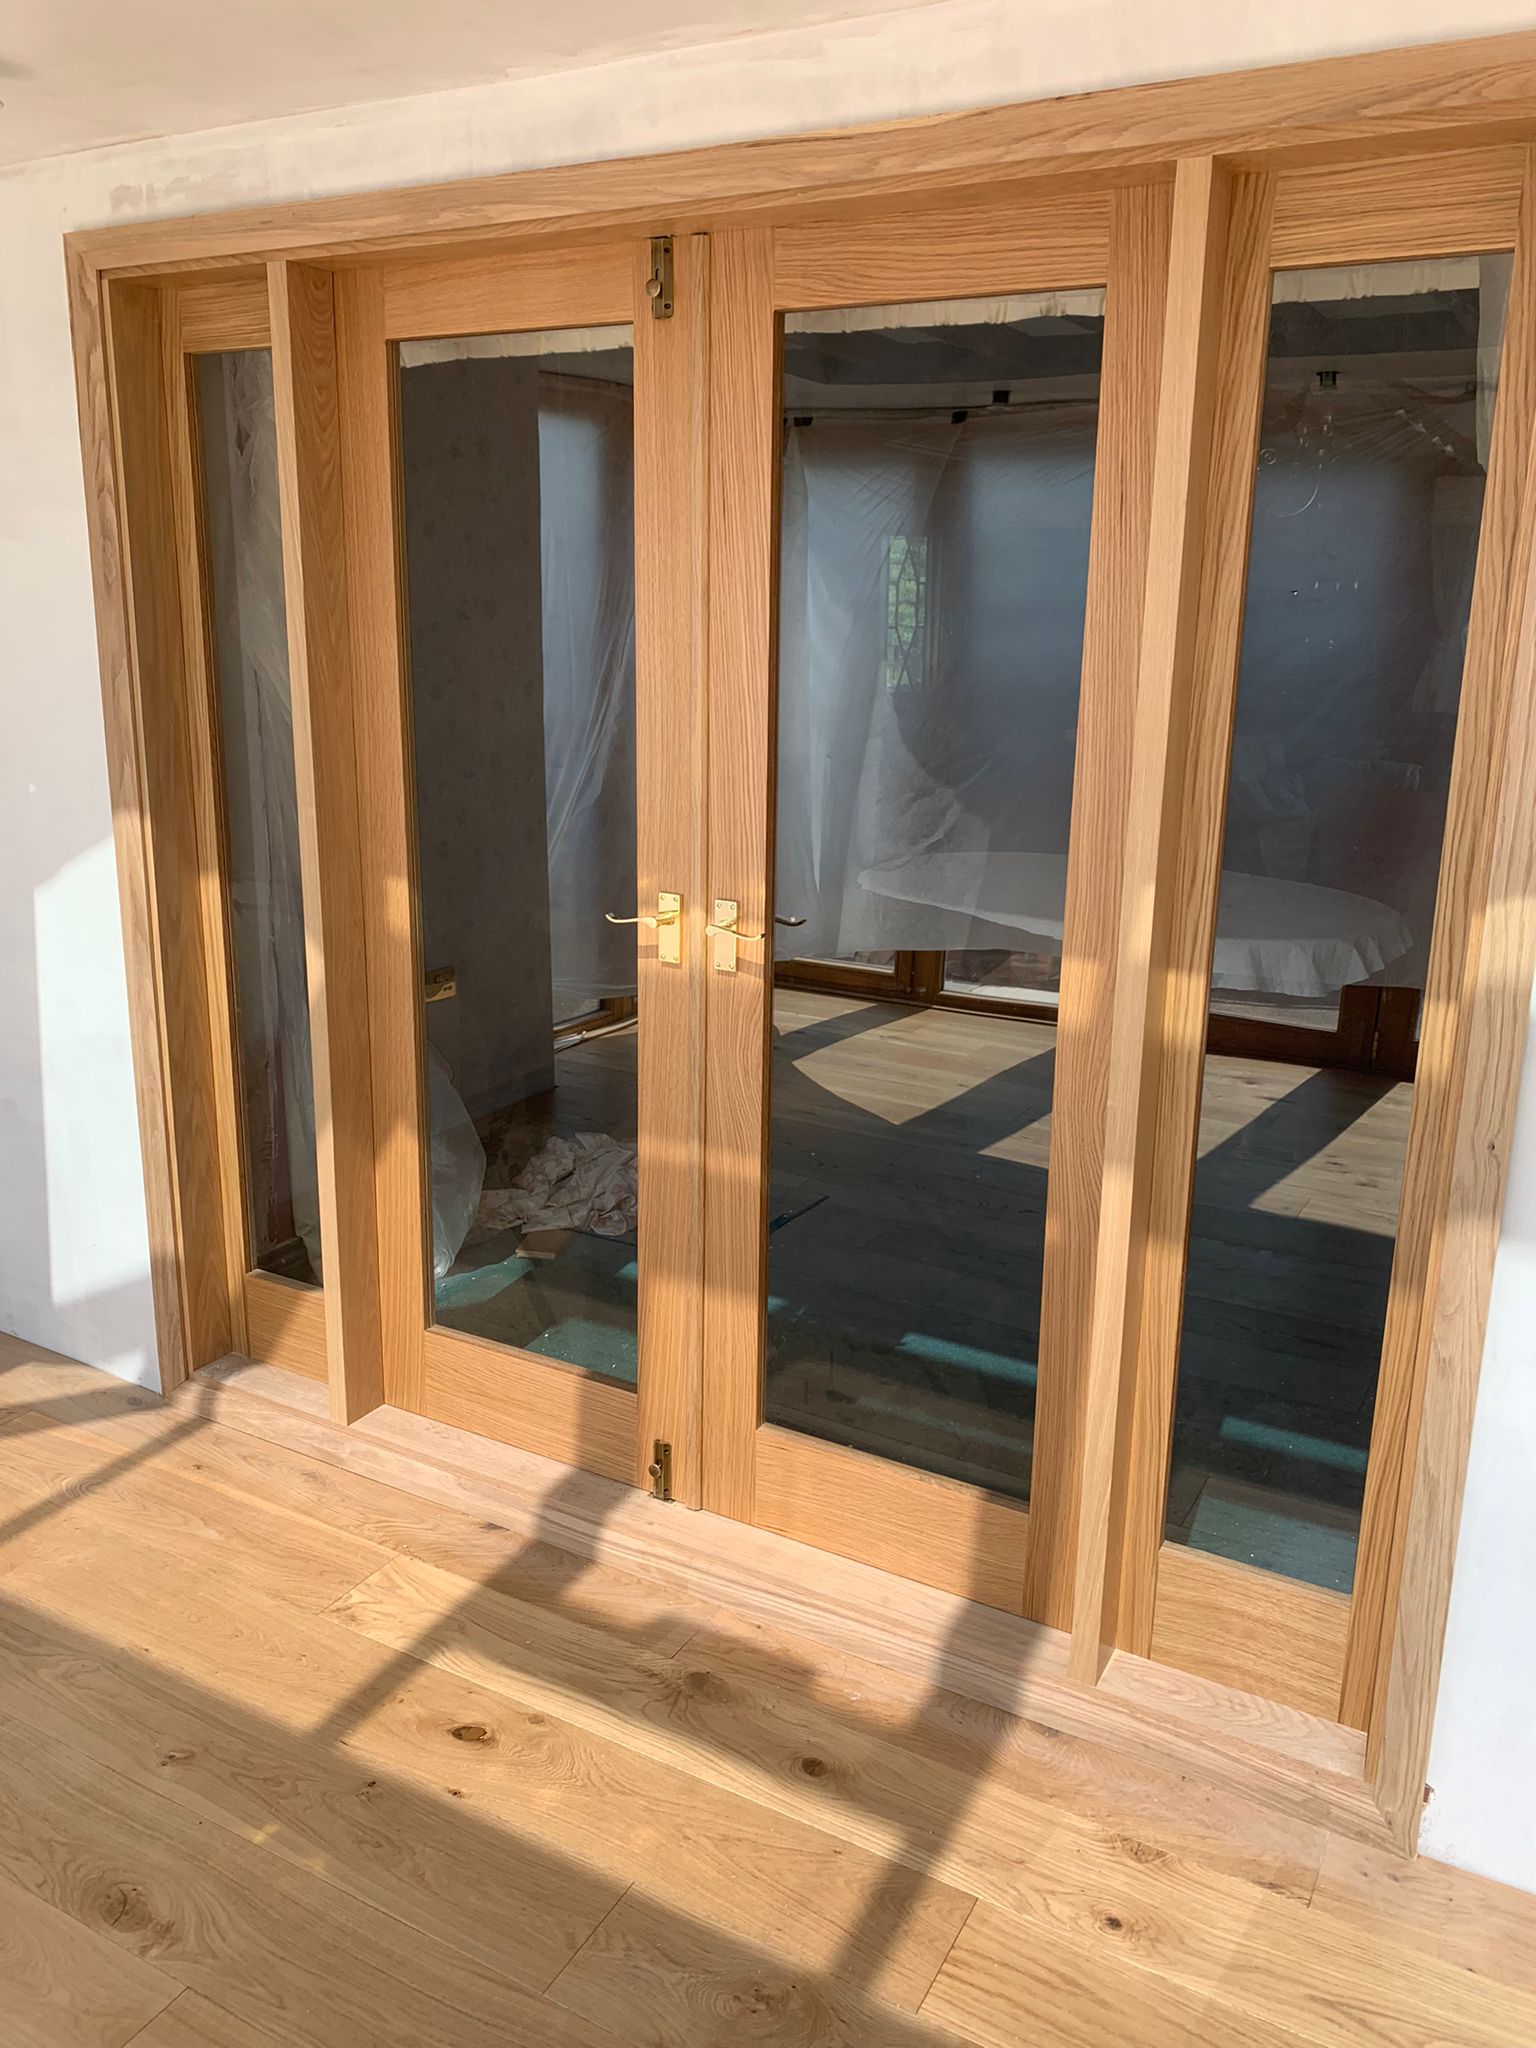 Timber and glass double doors by Kings Stag Joinery